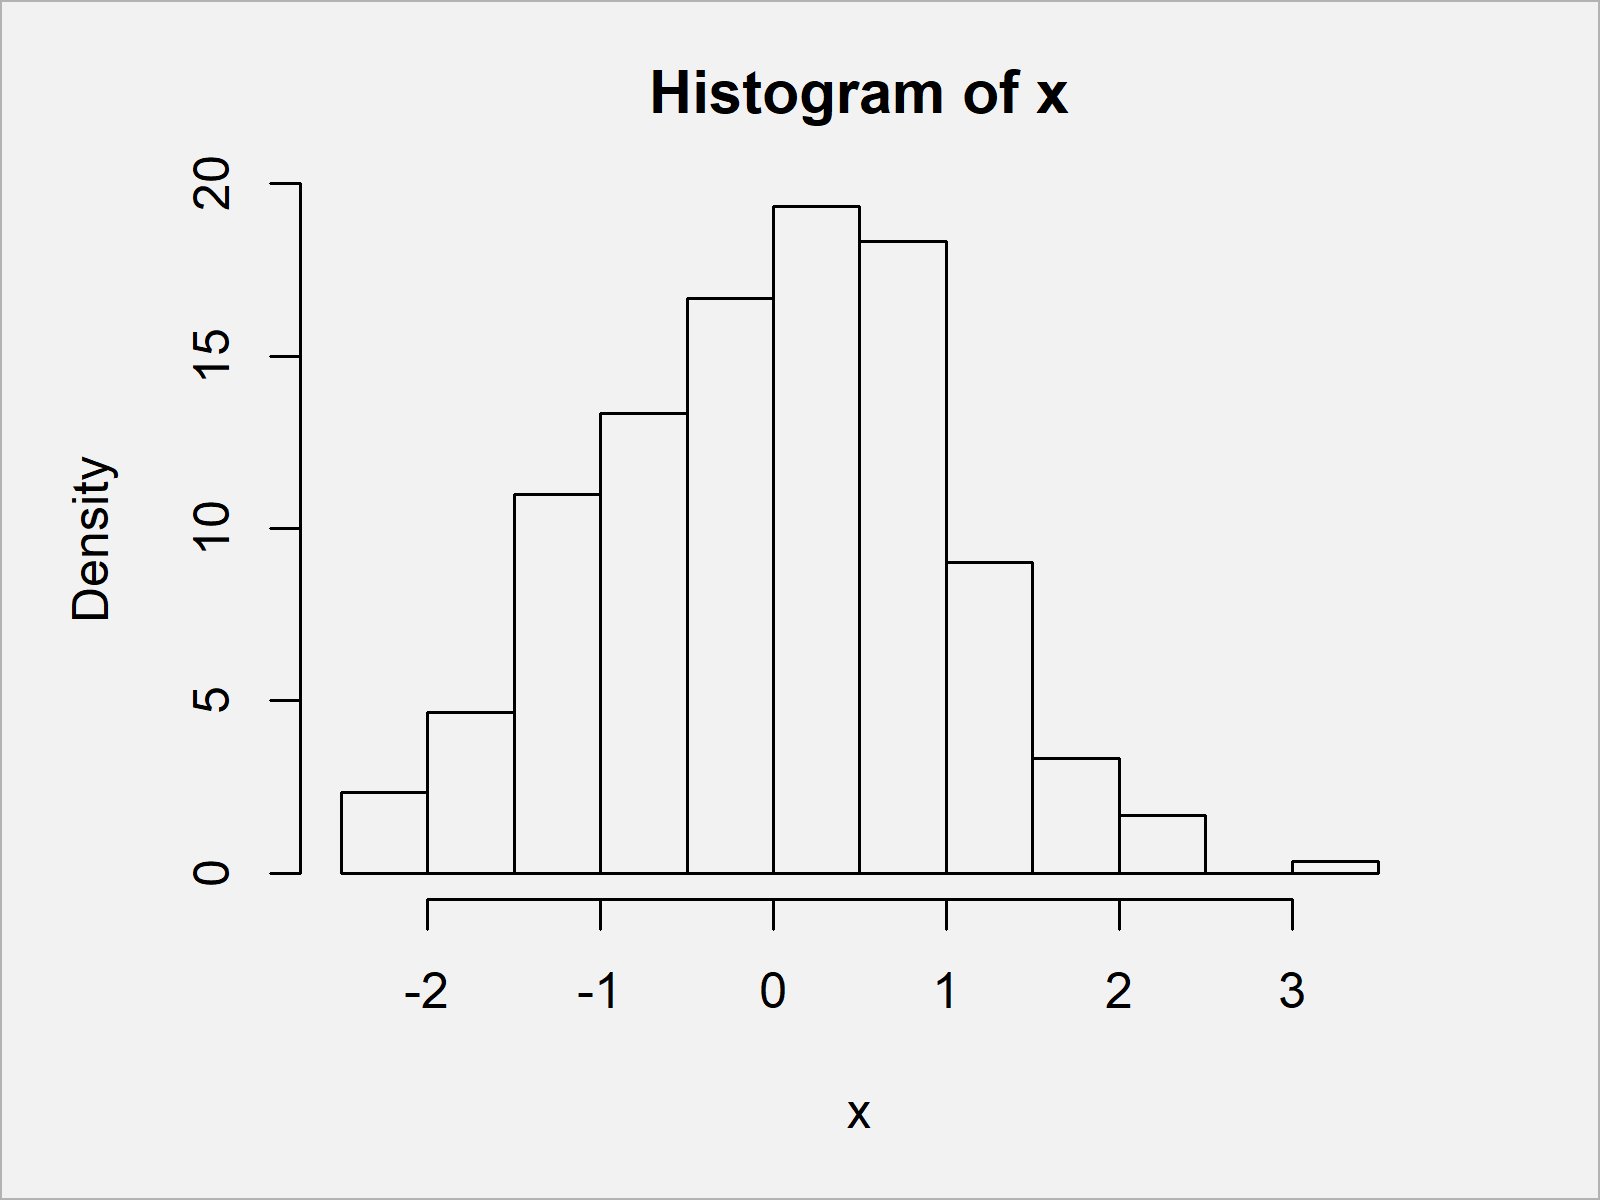 Draw Histogram with Percentages Instead of Frequency Counts in Base R